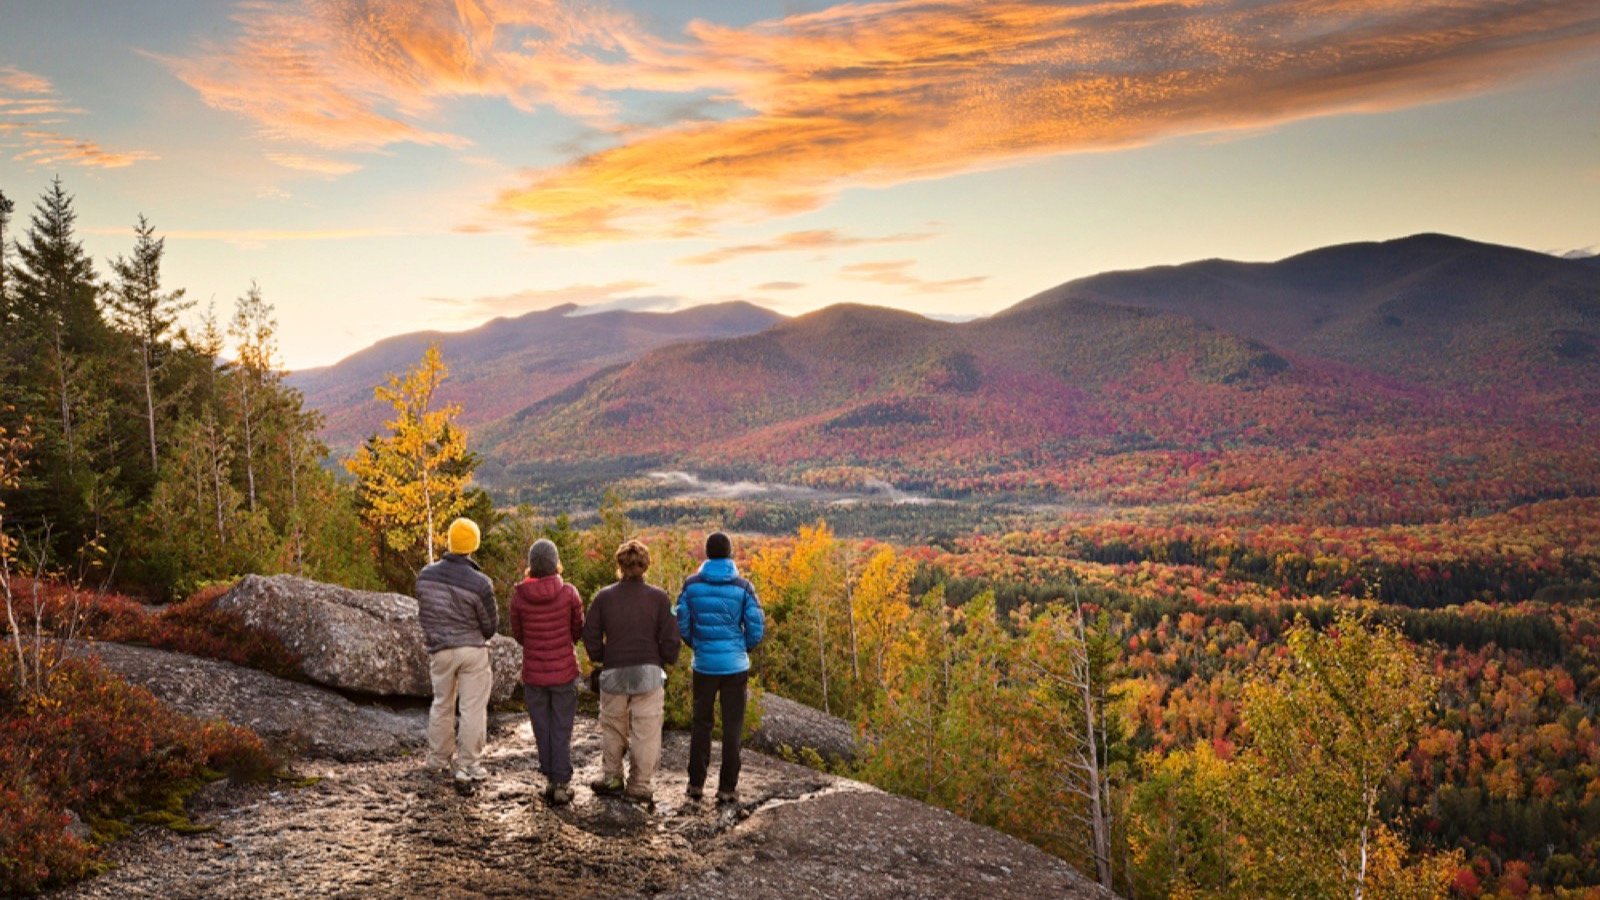 <p>The Adirondacks are another famous location, but they’re not overhyped. It’s an excellent destination for couples who want a mountain getaway with hiking, skiing, and other outdoor adventures.</p><p>No matter what the season, the Adirondacks are beautiful, with flourishing greenery or snow-capped peaks. We recommend this destination for those who want a thrilling, romantic getaway where they can connect with each other and nature.</p>